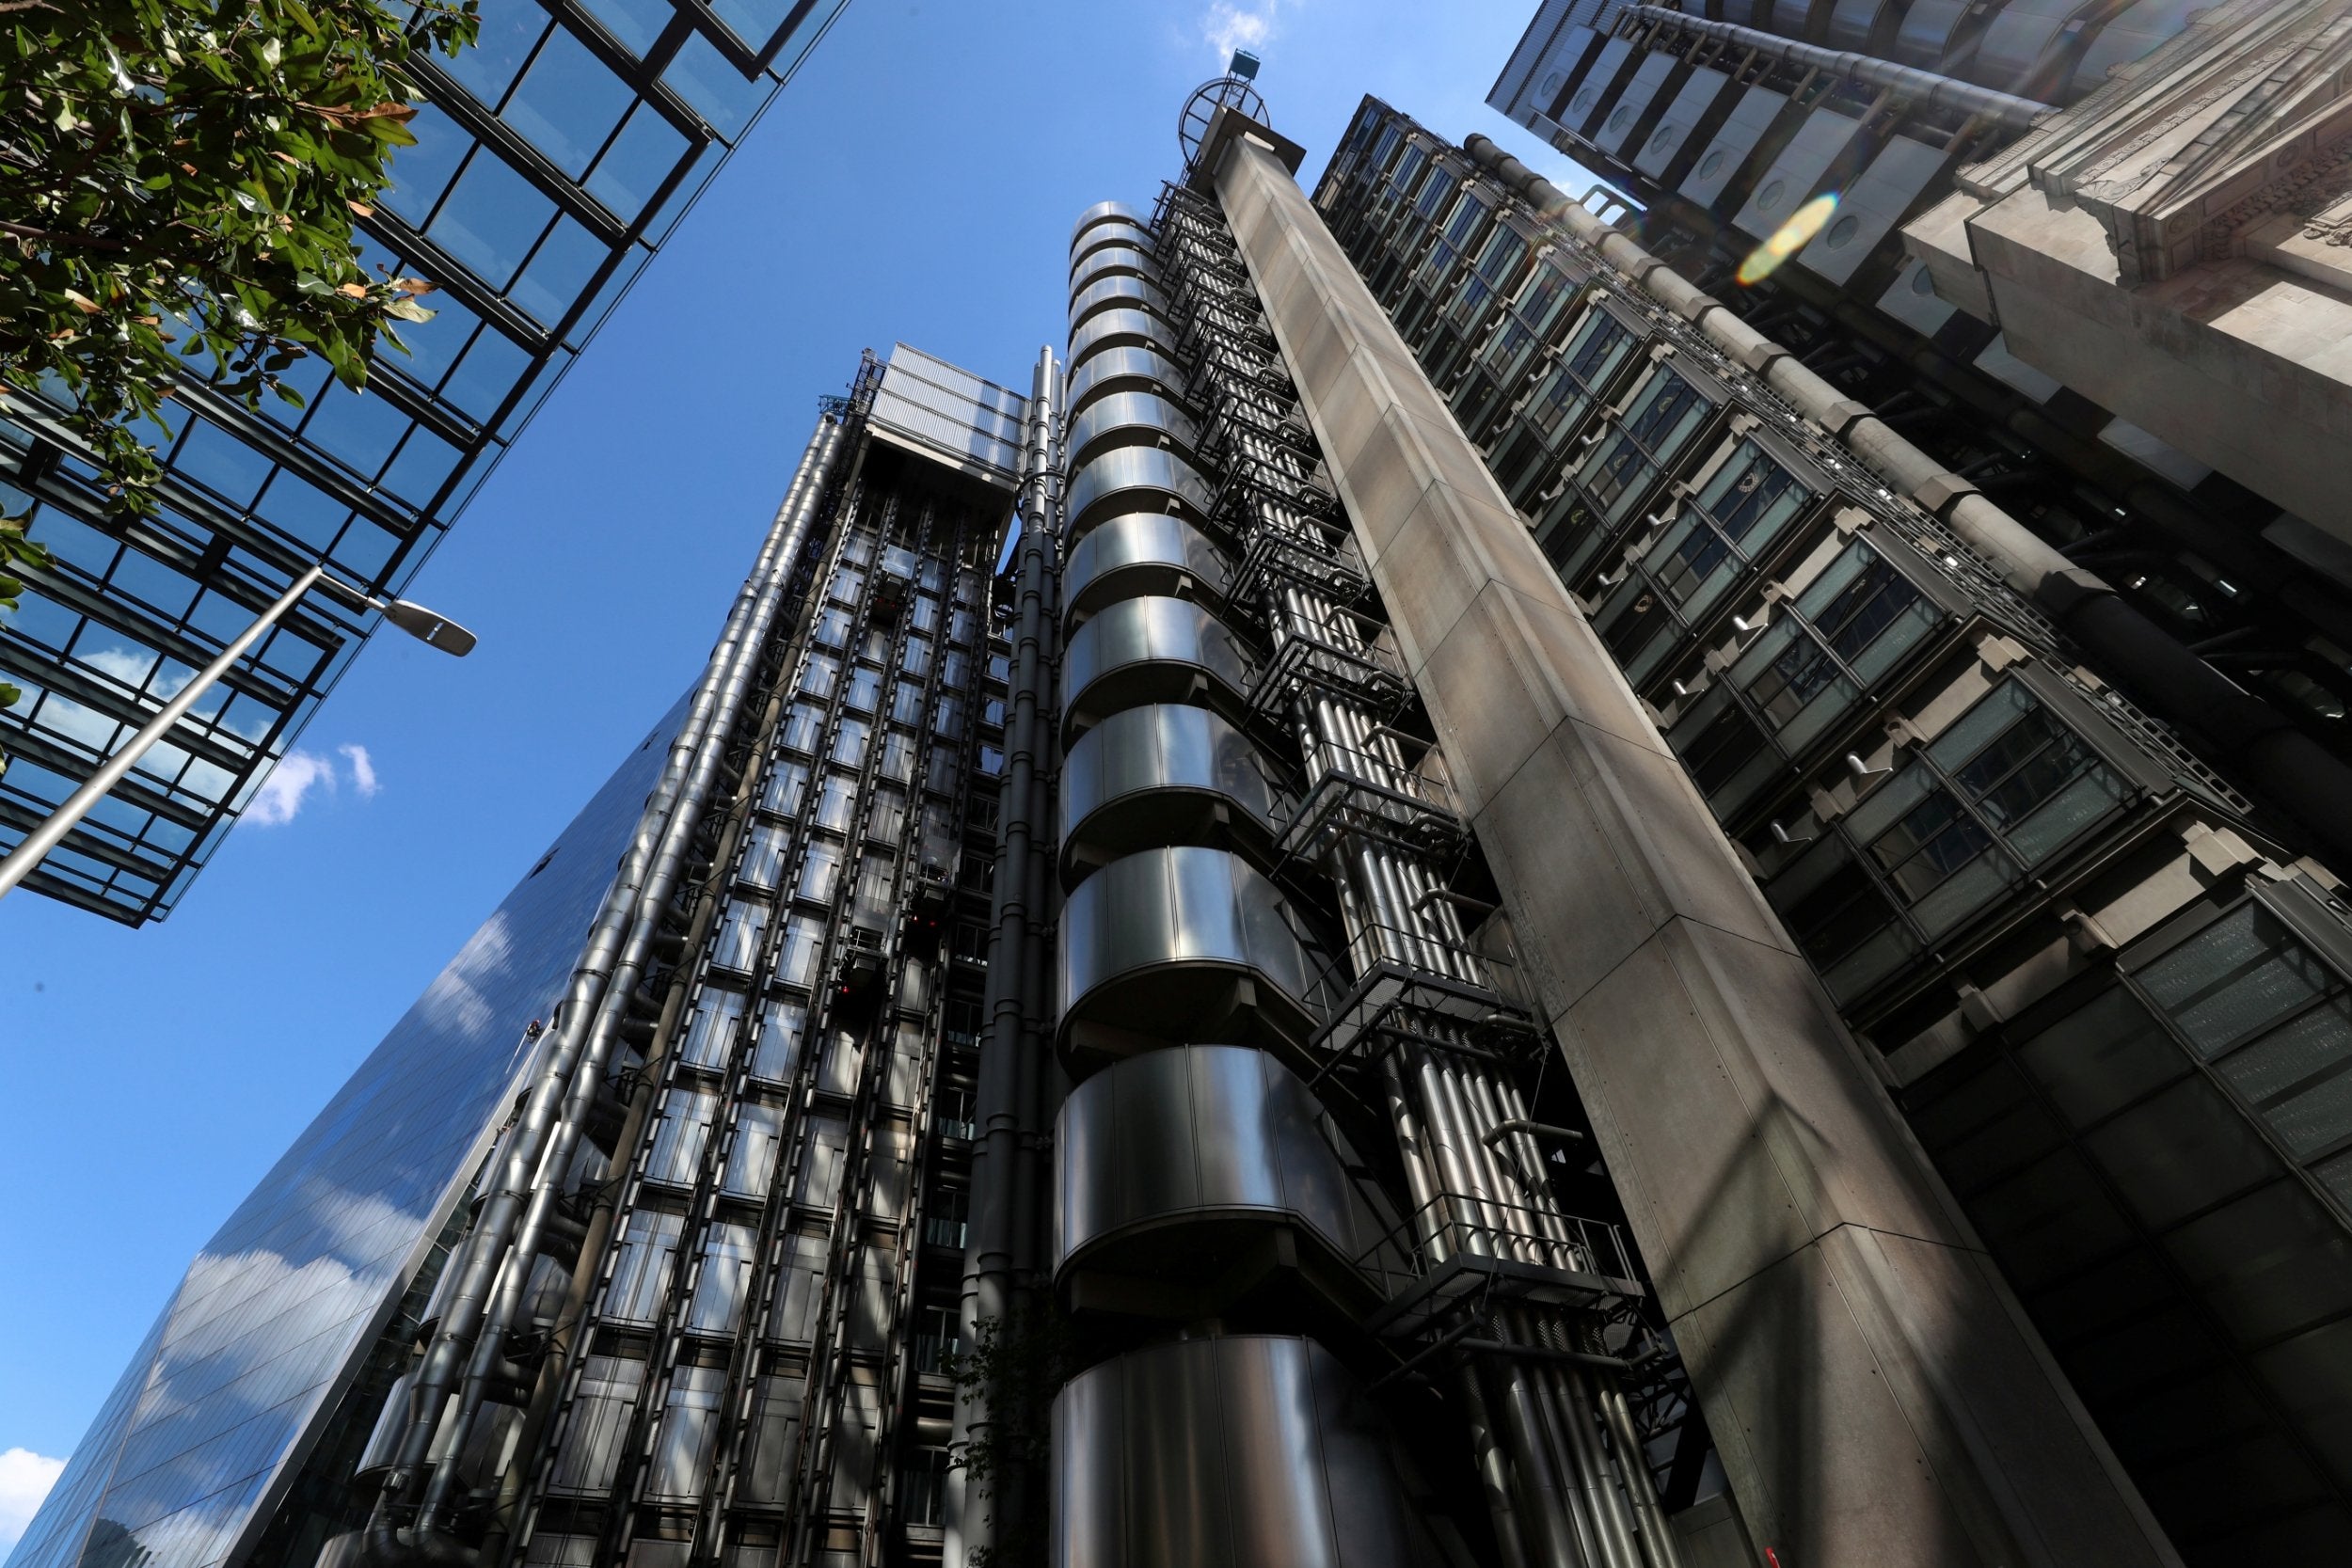 Lloyd's is also expected to replace a pub in its building with a cafe, and open up a harassment and bullying helpline for staff